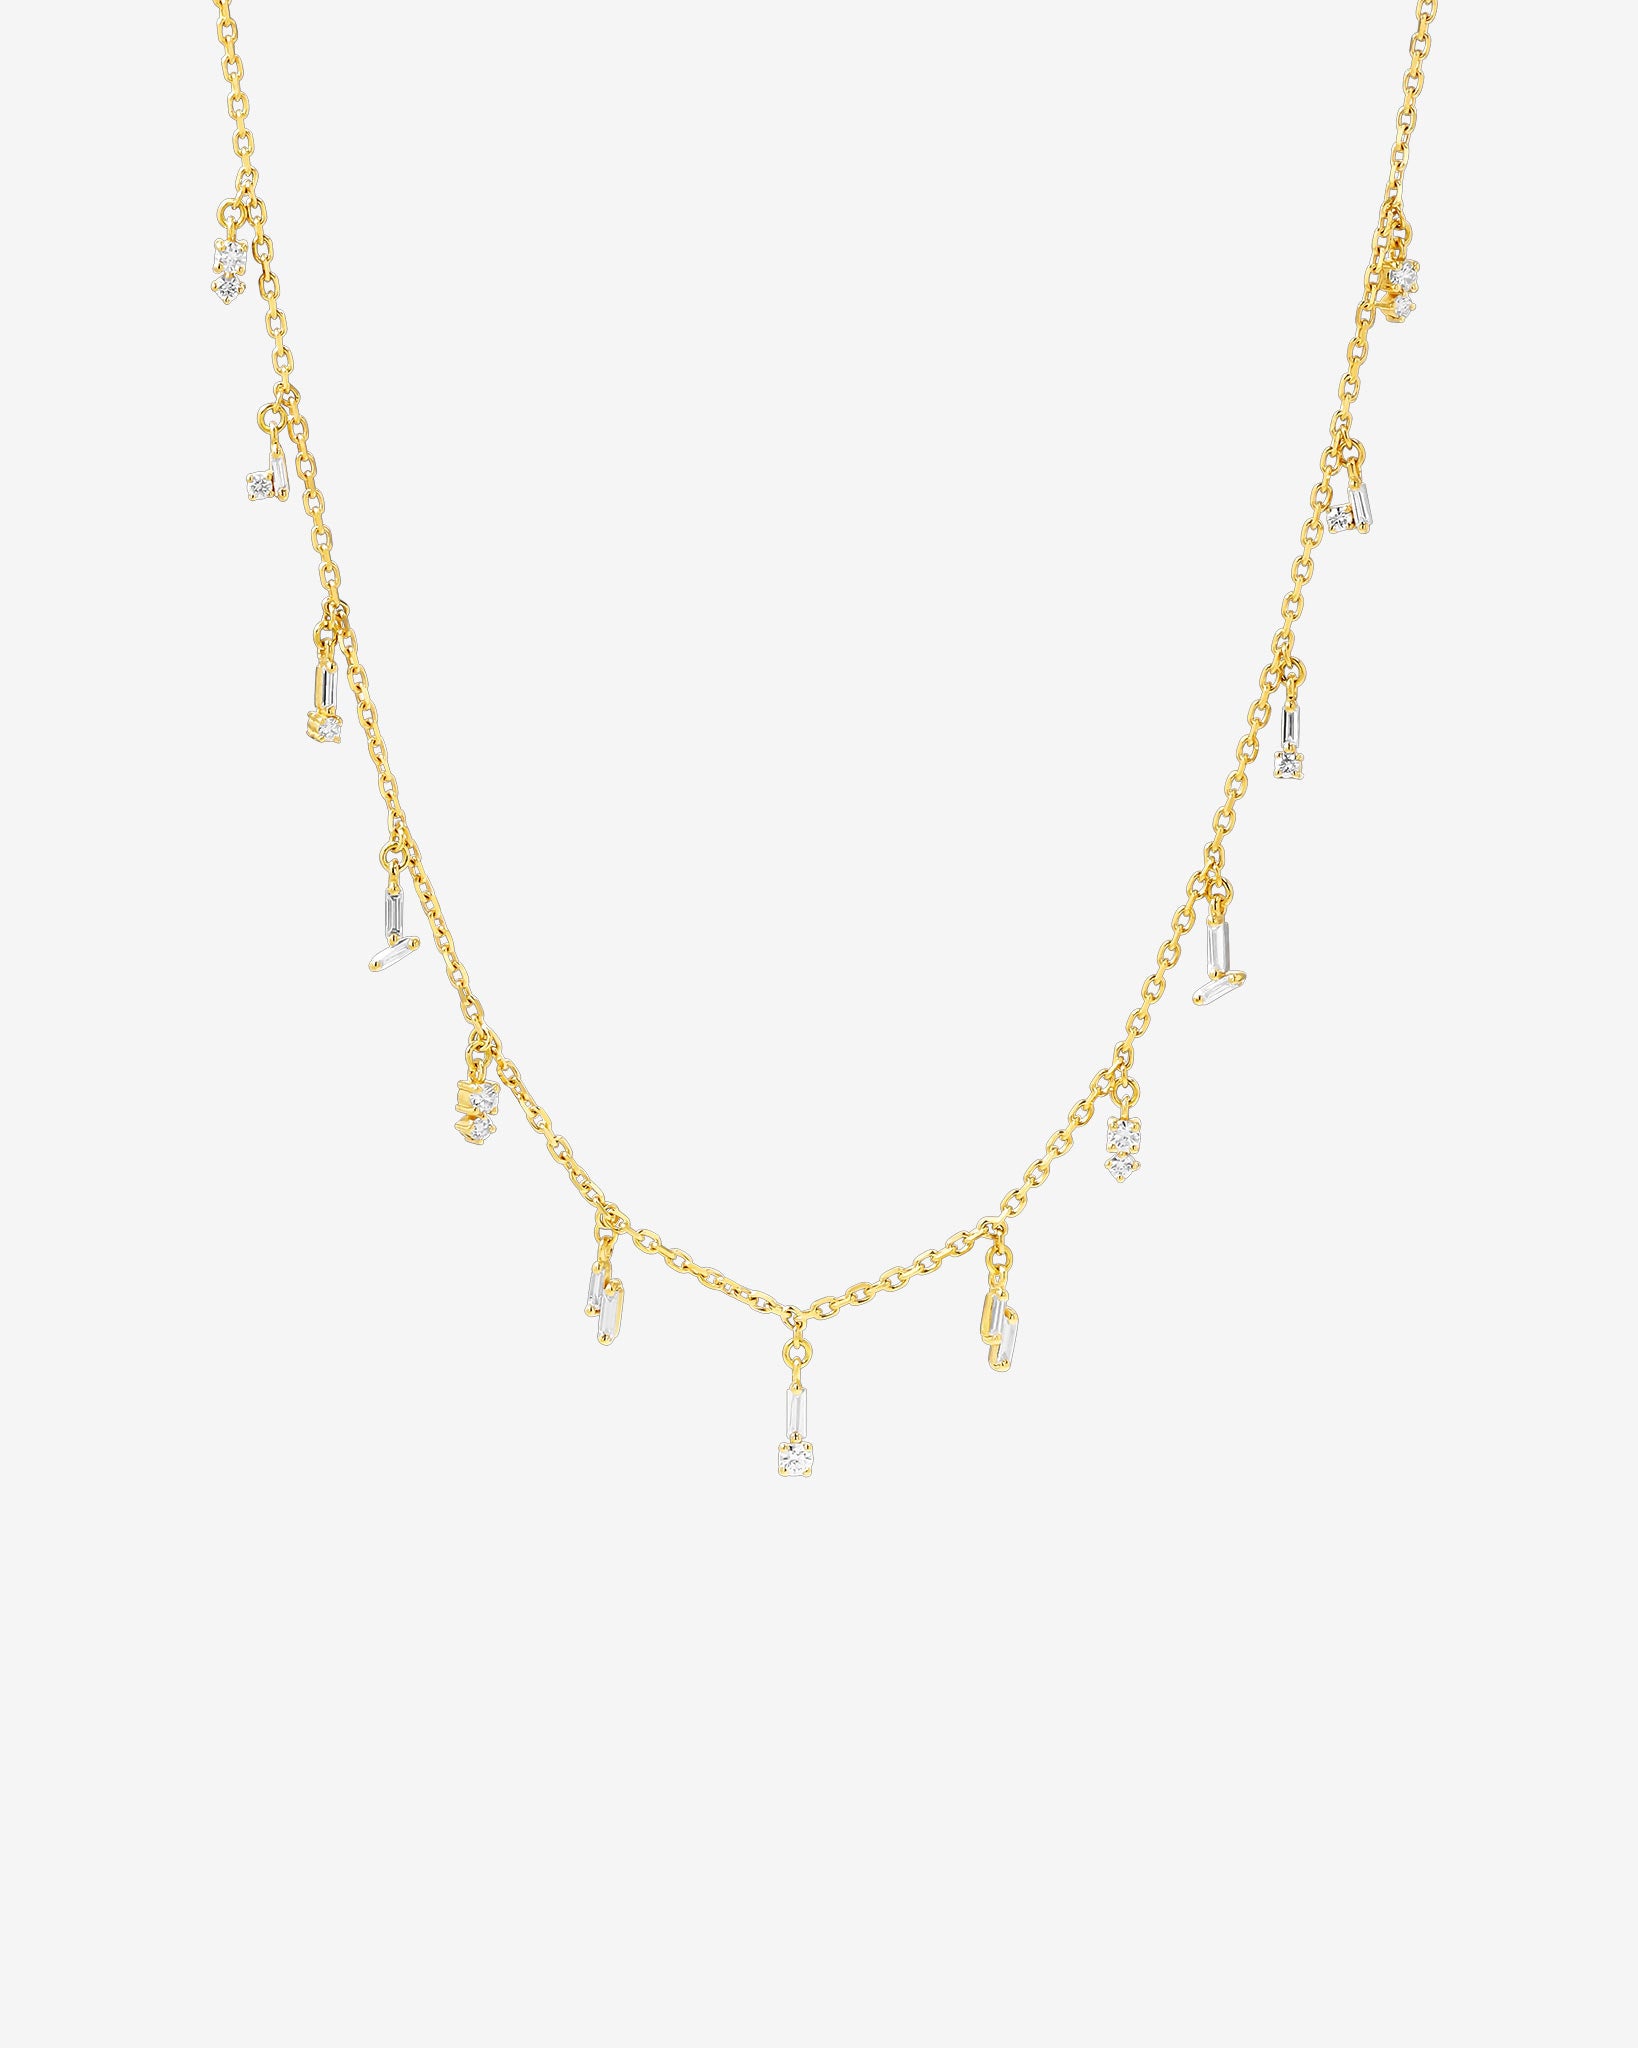 Suzanne Kalan Classic Diamond Drop Necklace in 18k yellow gold